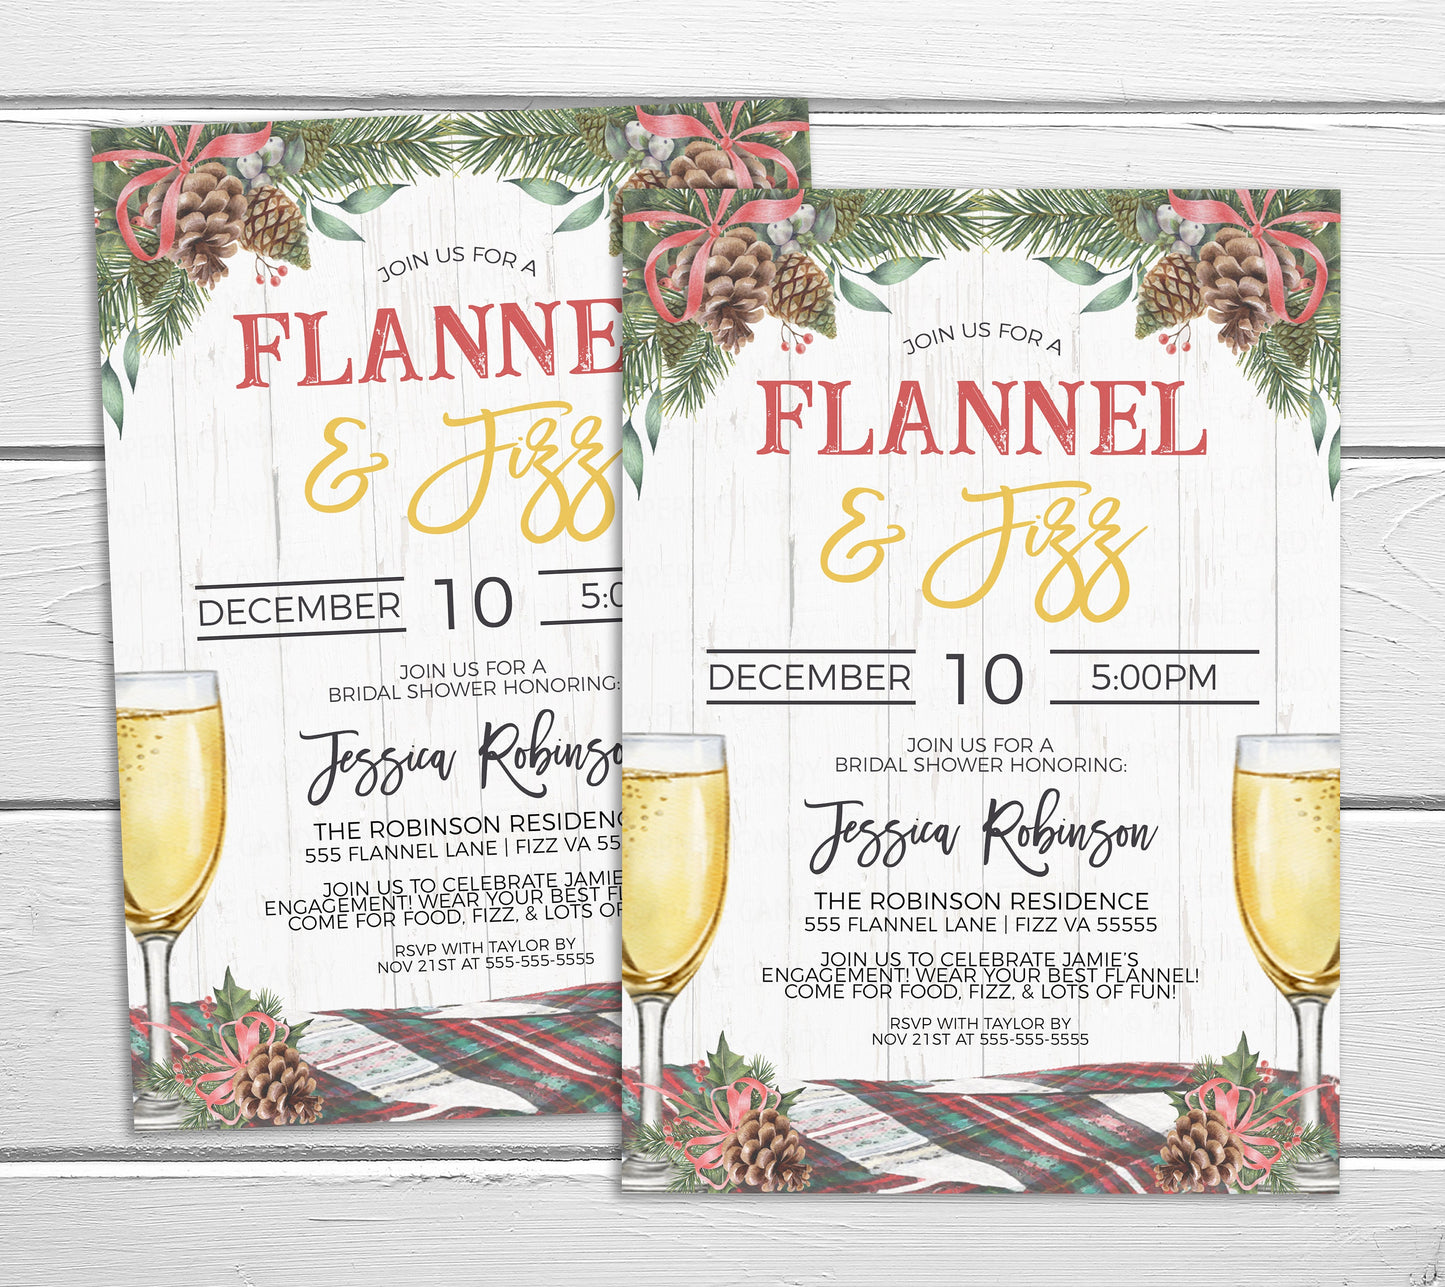 Flannel And Fizz Party Invitation, Plaid Bachelorette Invite, Flannel Fling Bridal Shower, Rustic Weekend Cabin, Editable Printable Template